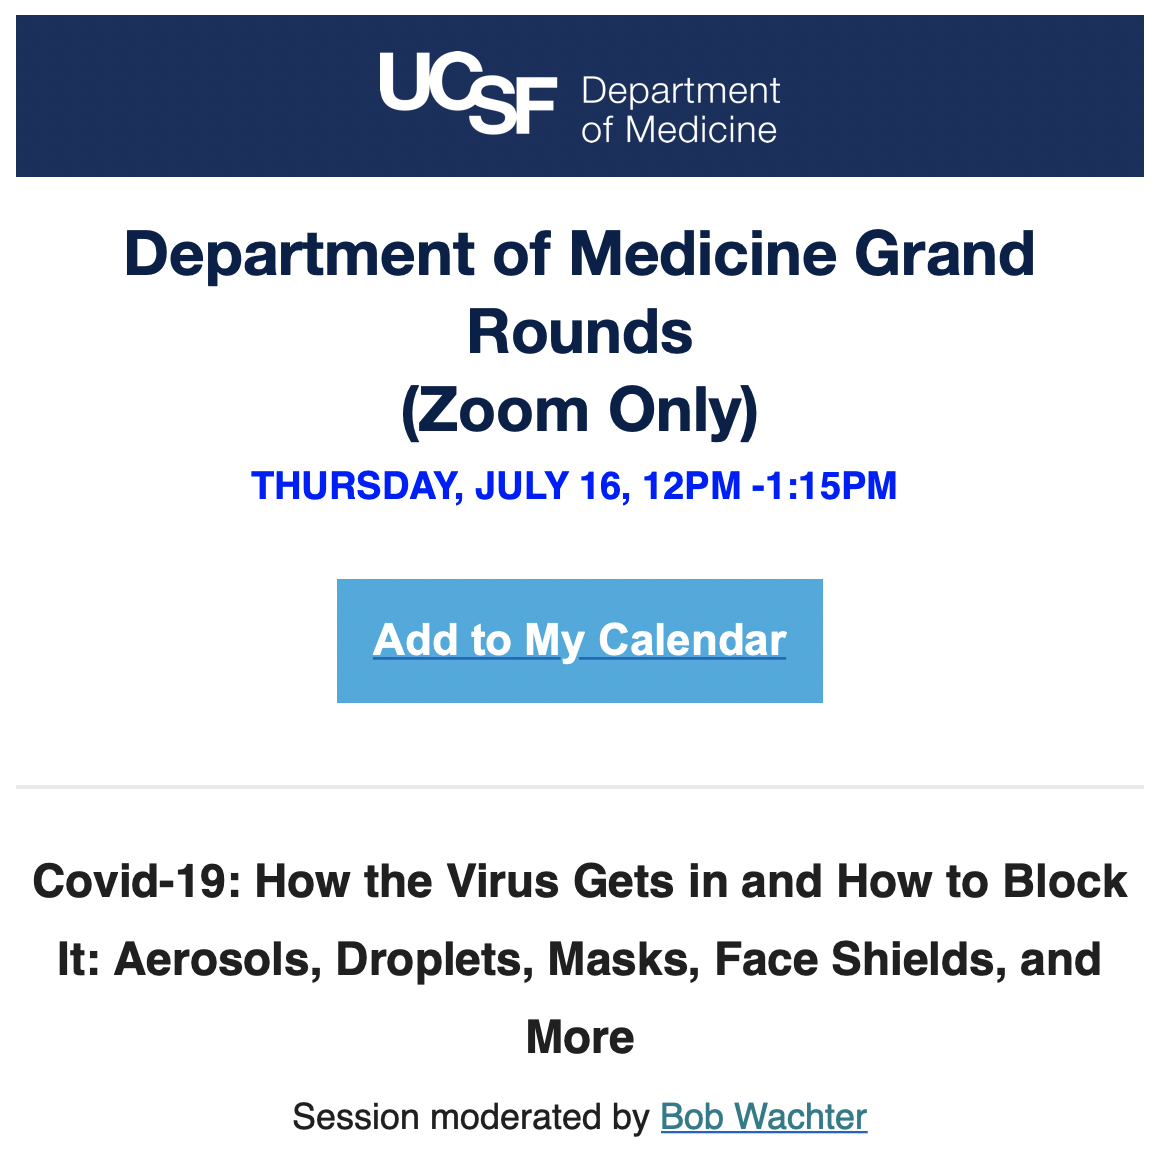 11/ That's it for now. Tomorrow back w/ what should be fascinating  @ucsf medical grand rounds: aerosol vs. droplets, masks, and face shields (program below). Live for UCSFers at noon; should be up on youtube ~7:30pm if Twitter is open. Back Friday for weekly roundup.Stay safe.